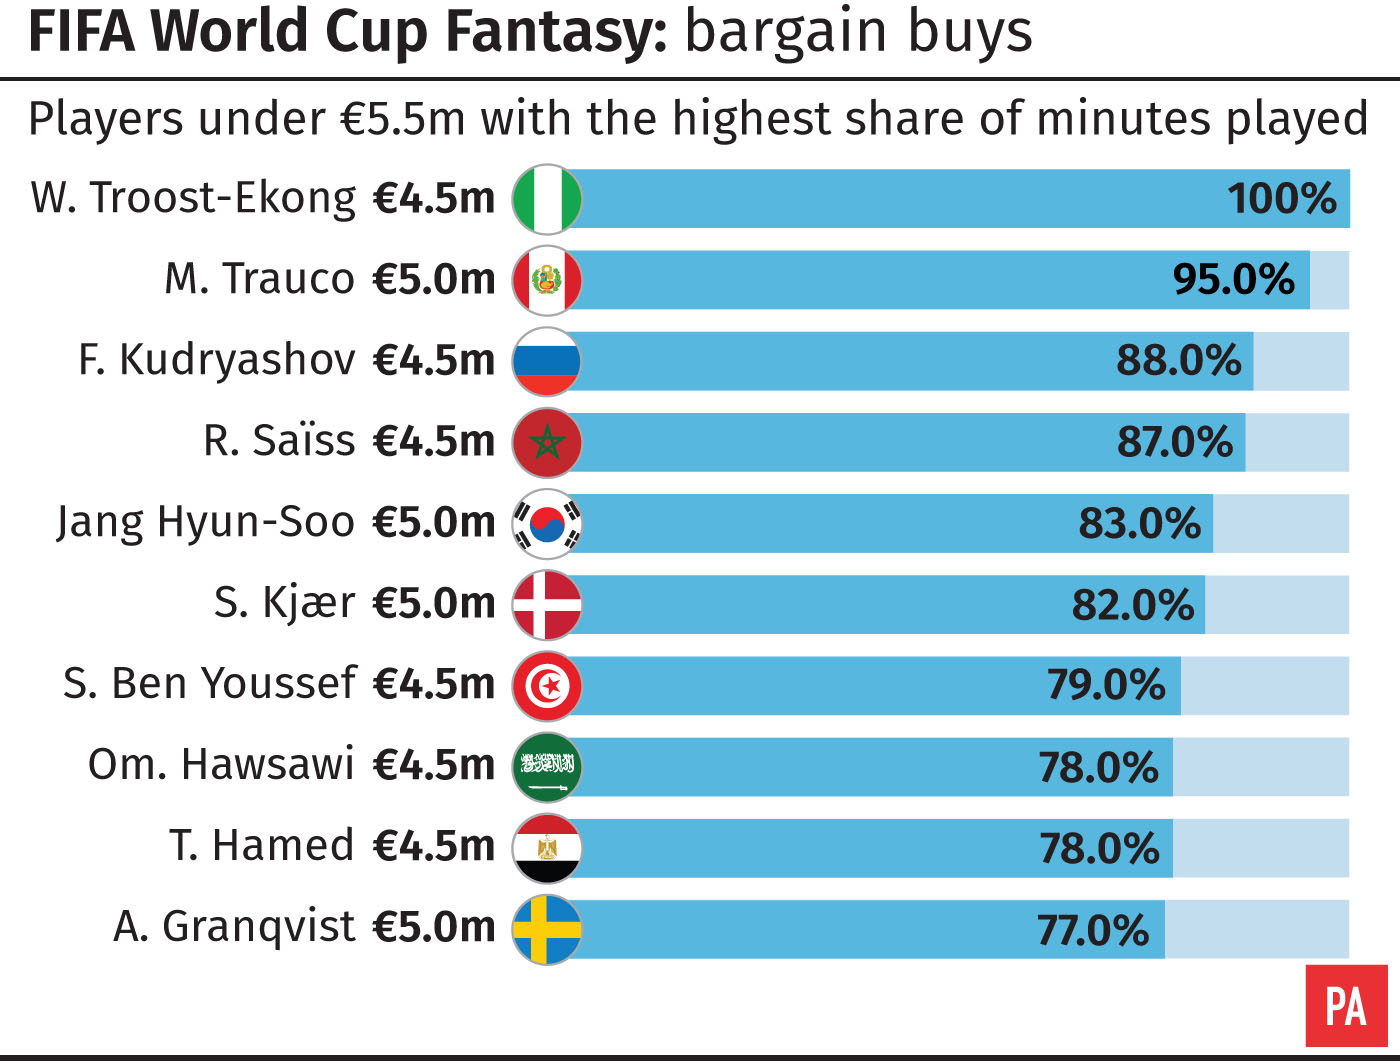 Which players will prove to be good bargain buys for fantasy football managers at the 2018 World Cup?